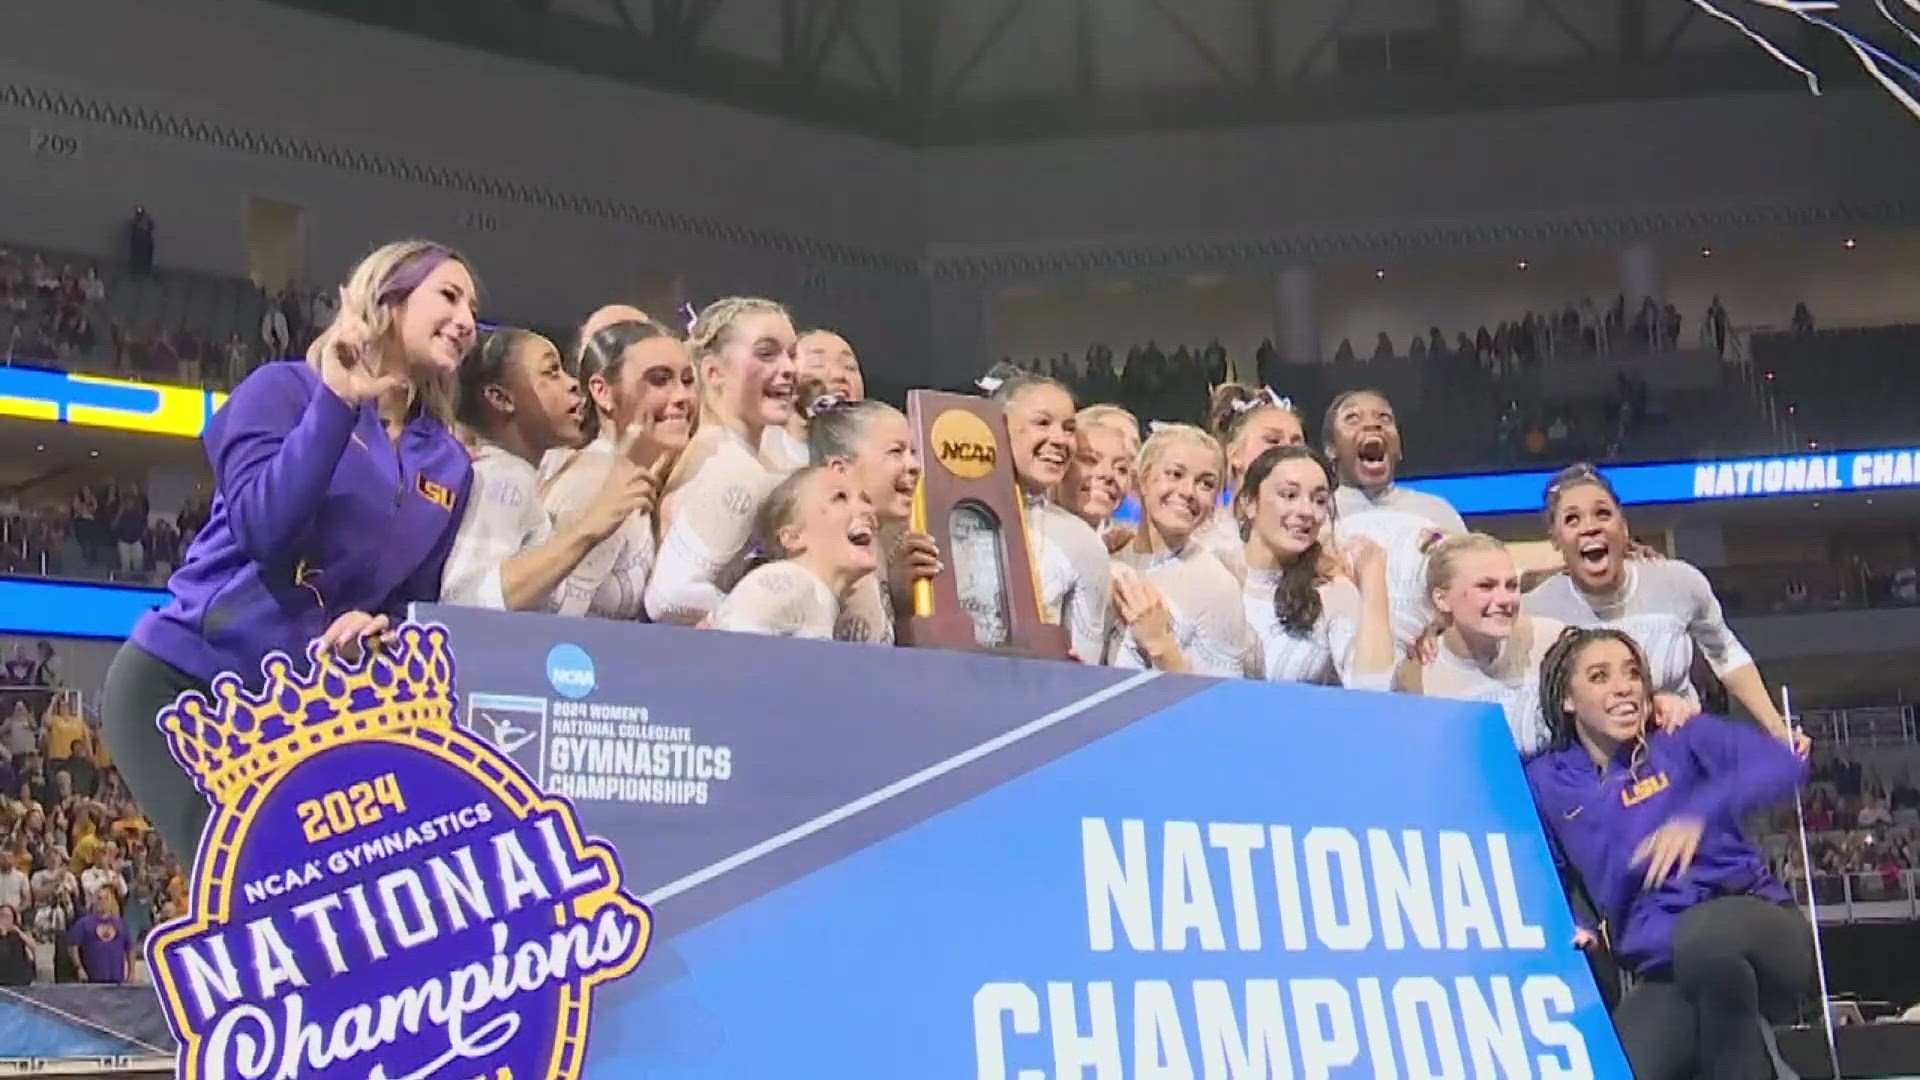 LSU's gymnastics team has earned its first-ever NCAA National Championship with a score of 198.225